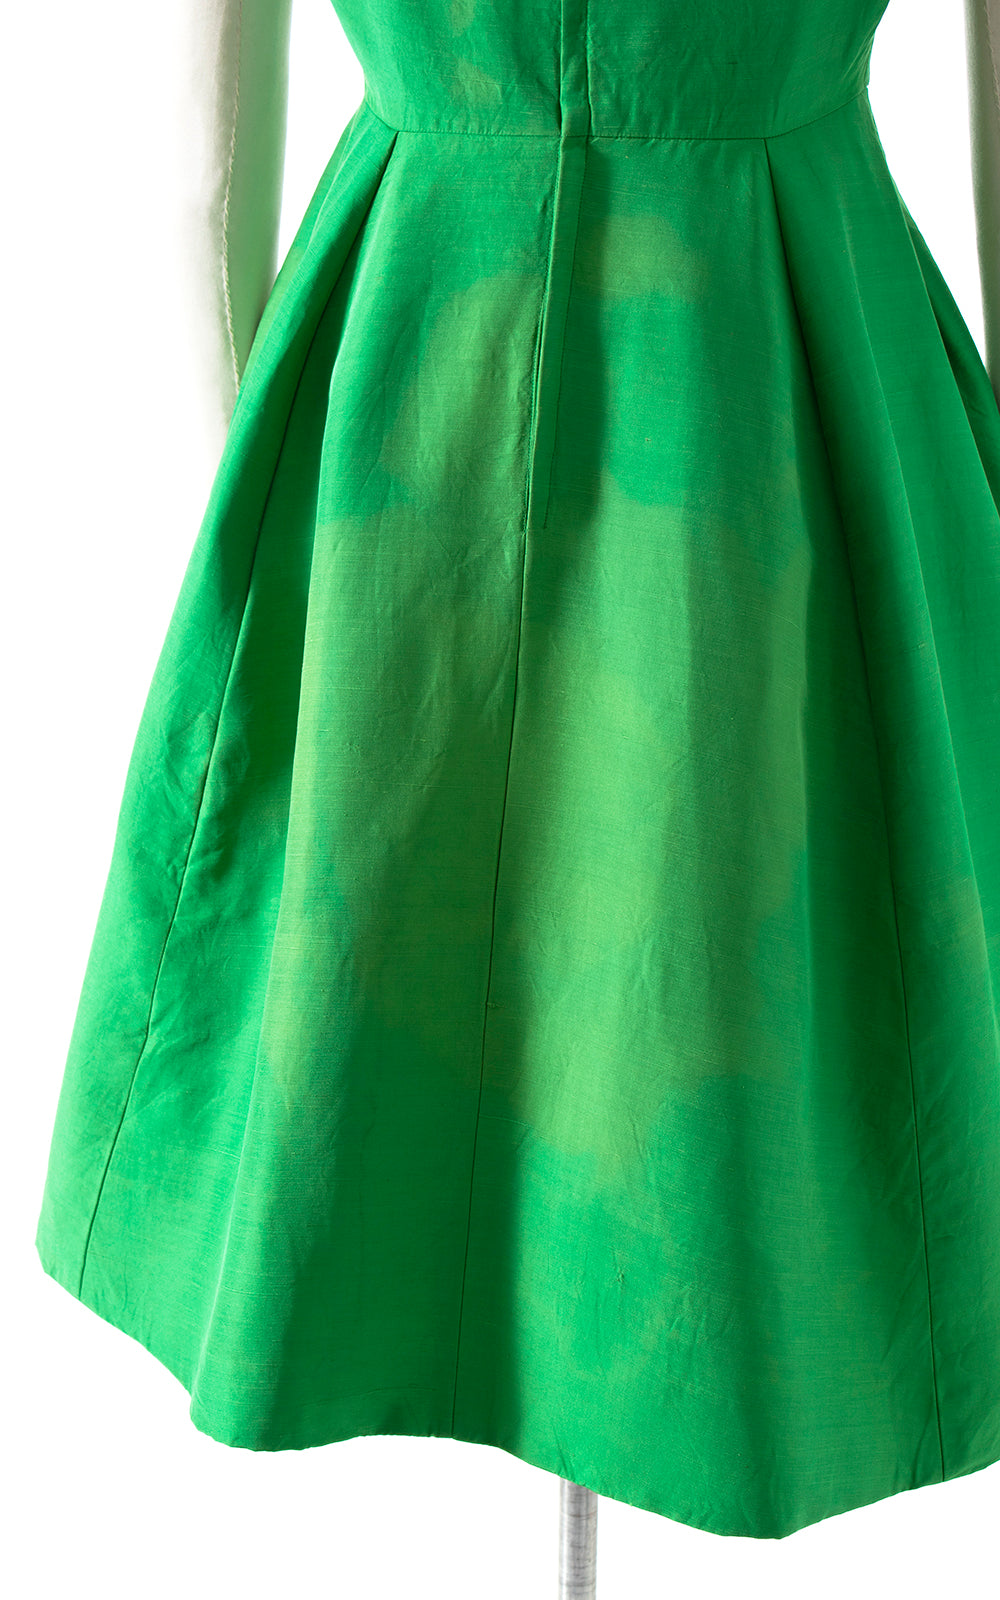 Vintage 1950s 1960s Raw Silk Kelly Green Fit and Flare Formal Evening Party Dress Birthday Life Vintage